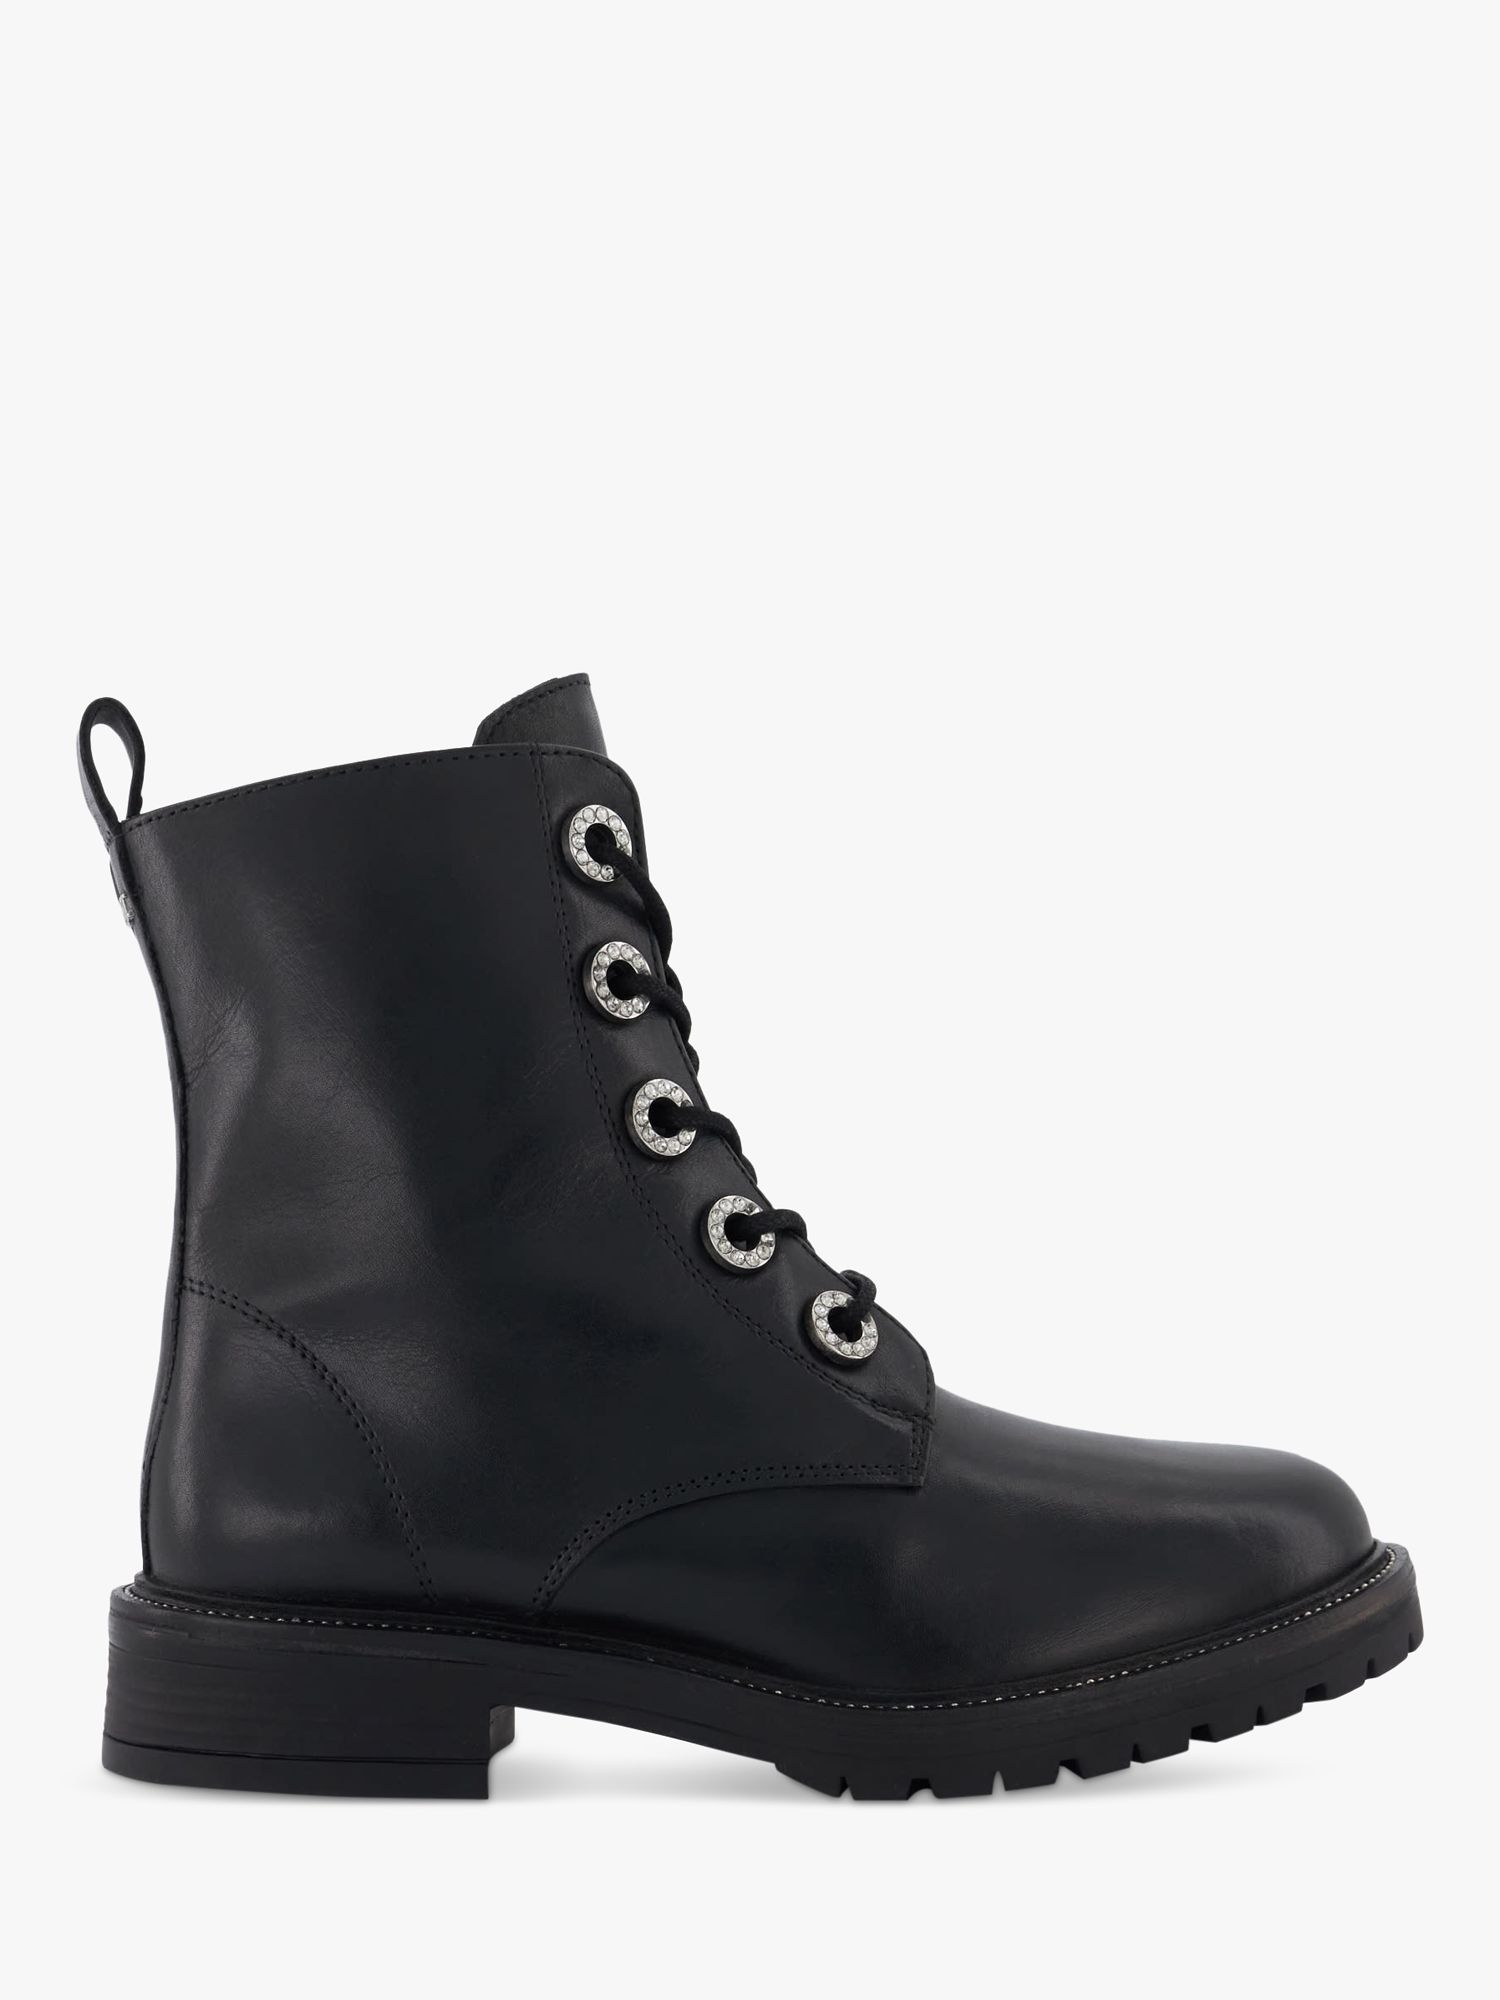 Dune Precious 2 Leather Cleated Ankle Boots, Black at John Lewis & Partners